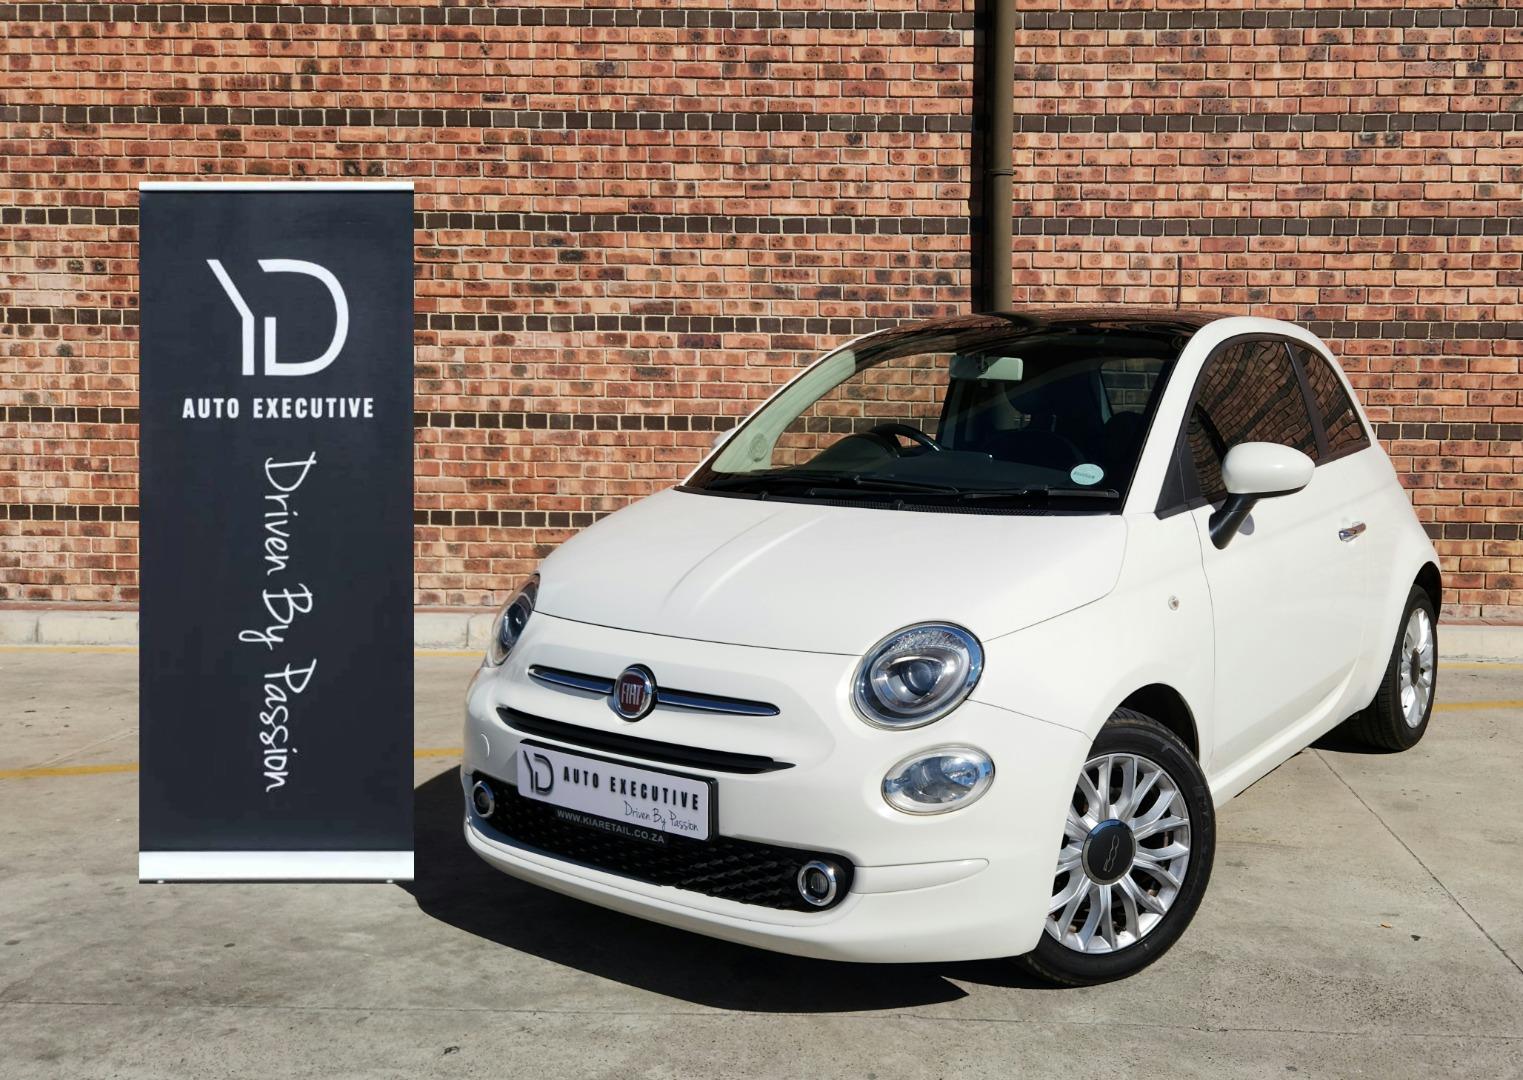 2017 Fiat 500 TwinAir 77kW Lounge For Sale